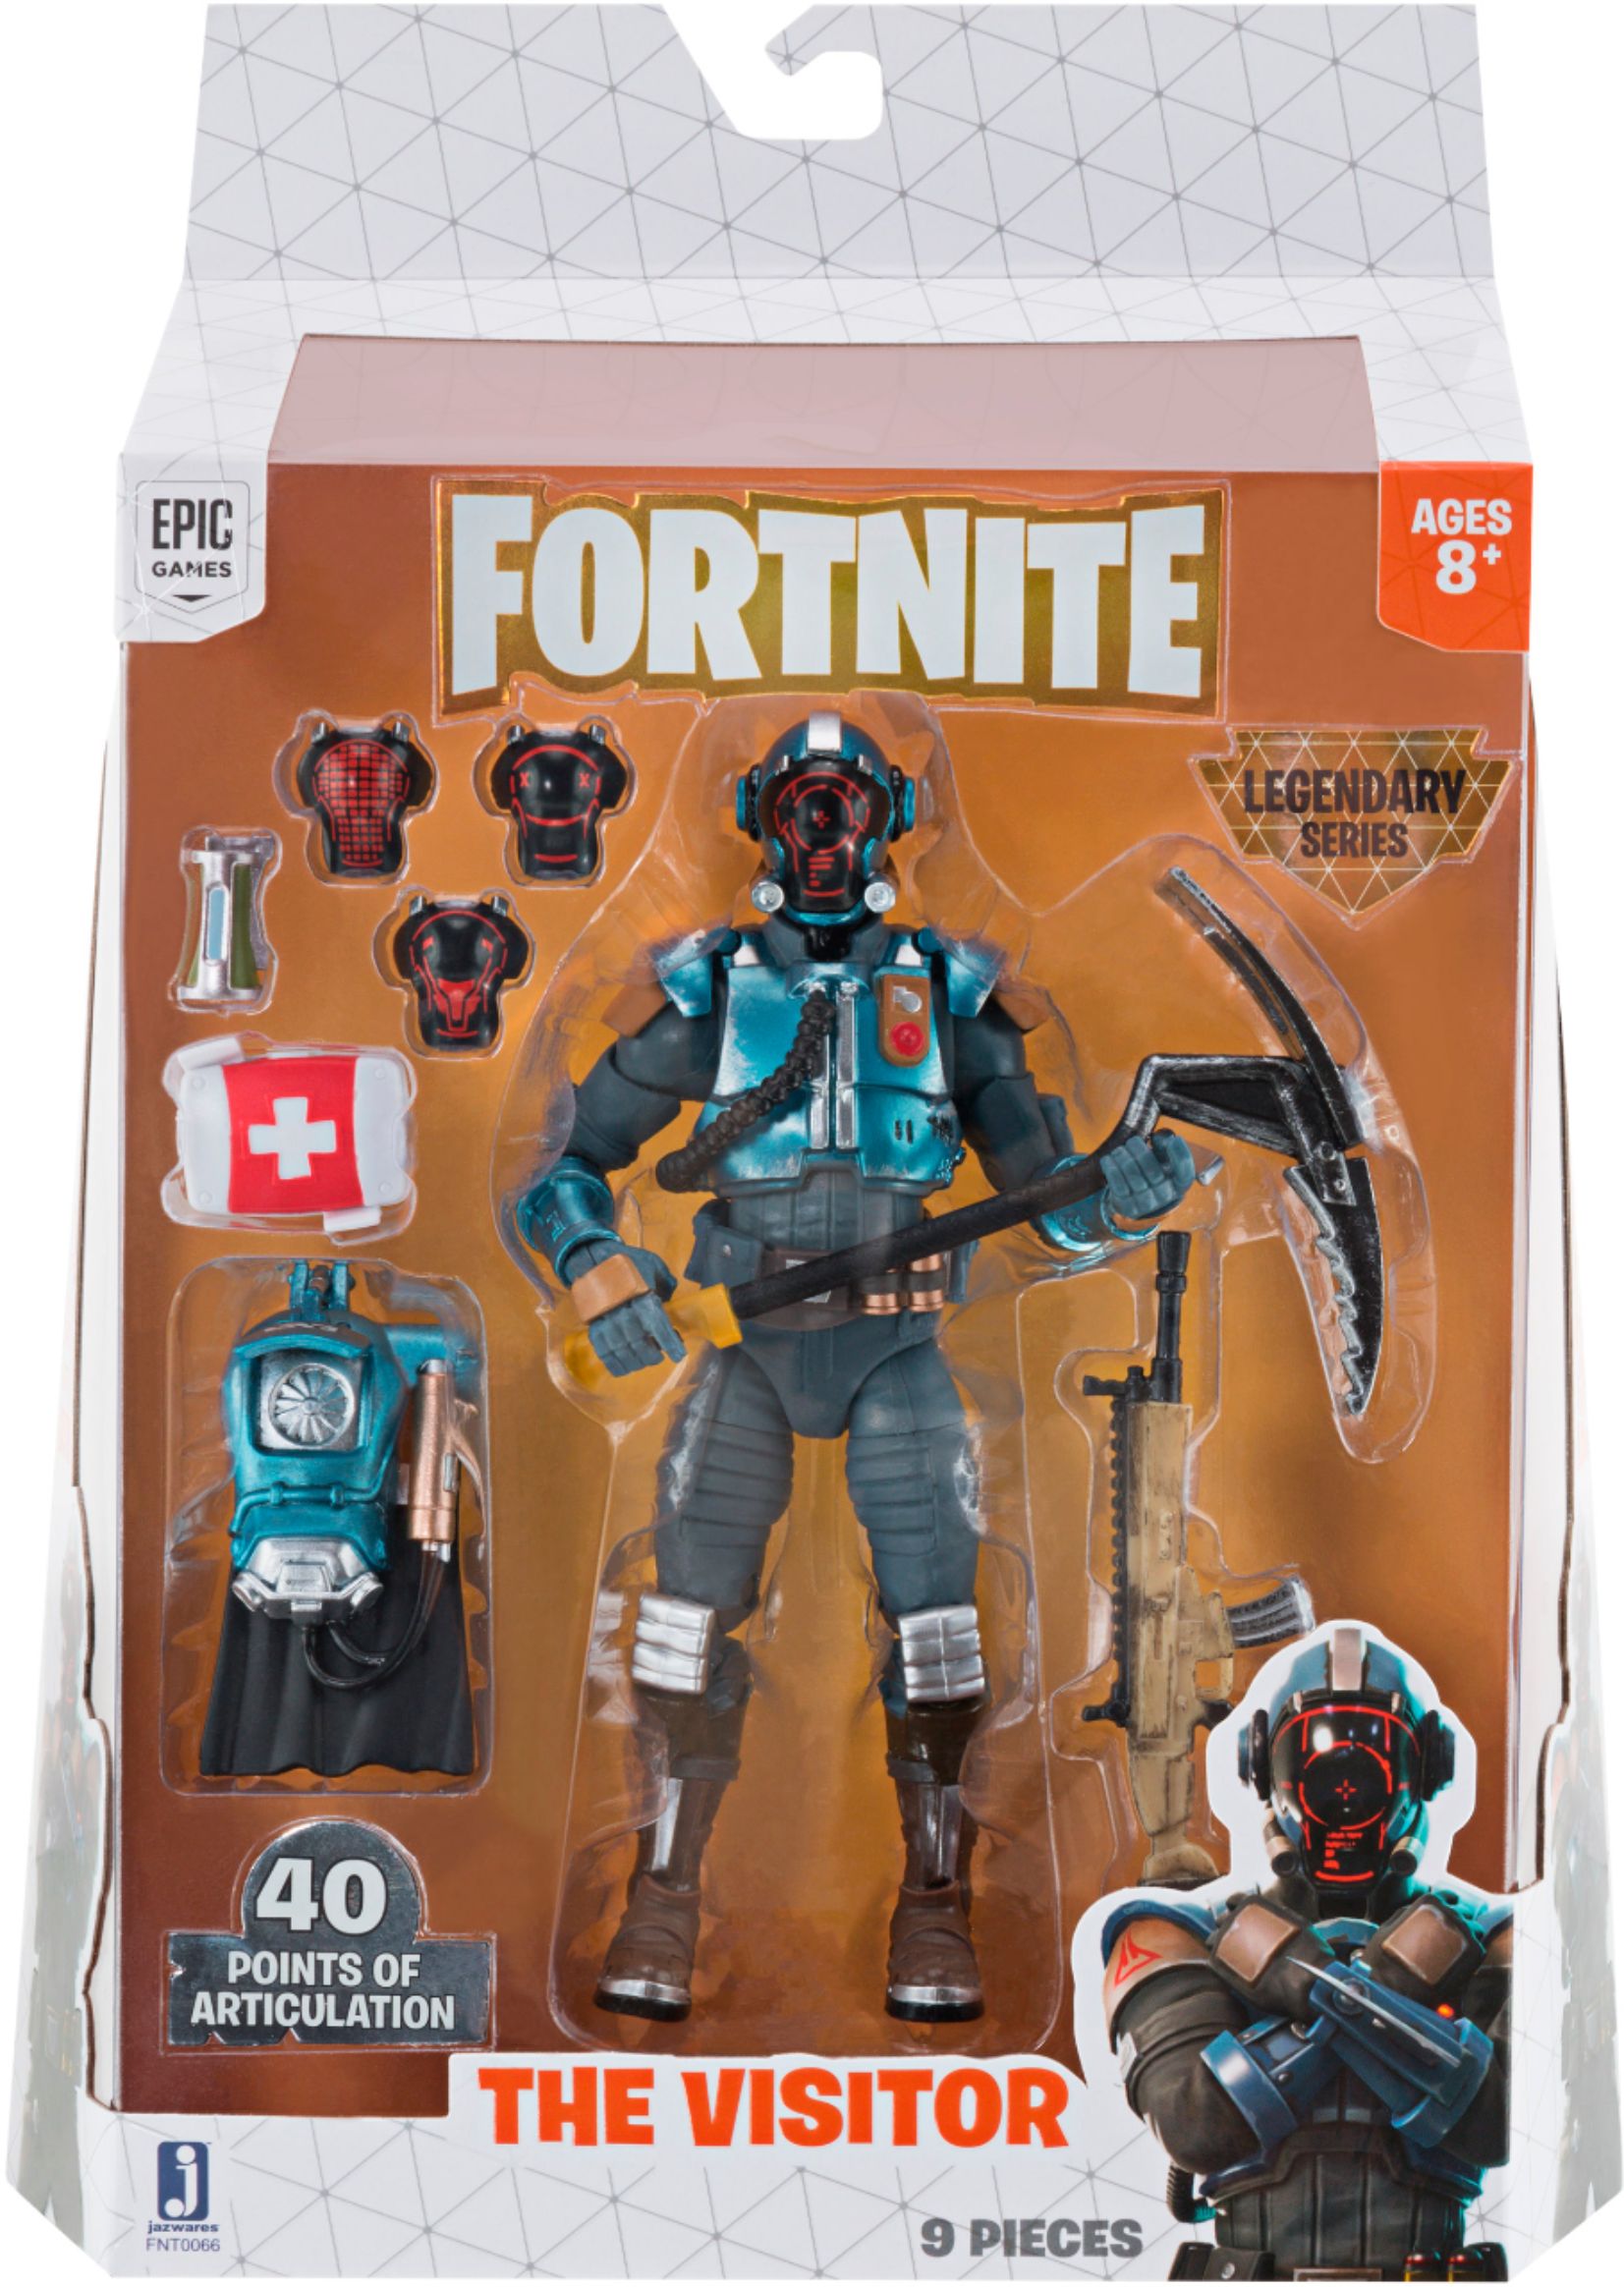 Fortnite Legendary Series The Visitor Articulated Figure Blue/Black/Red ...